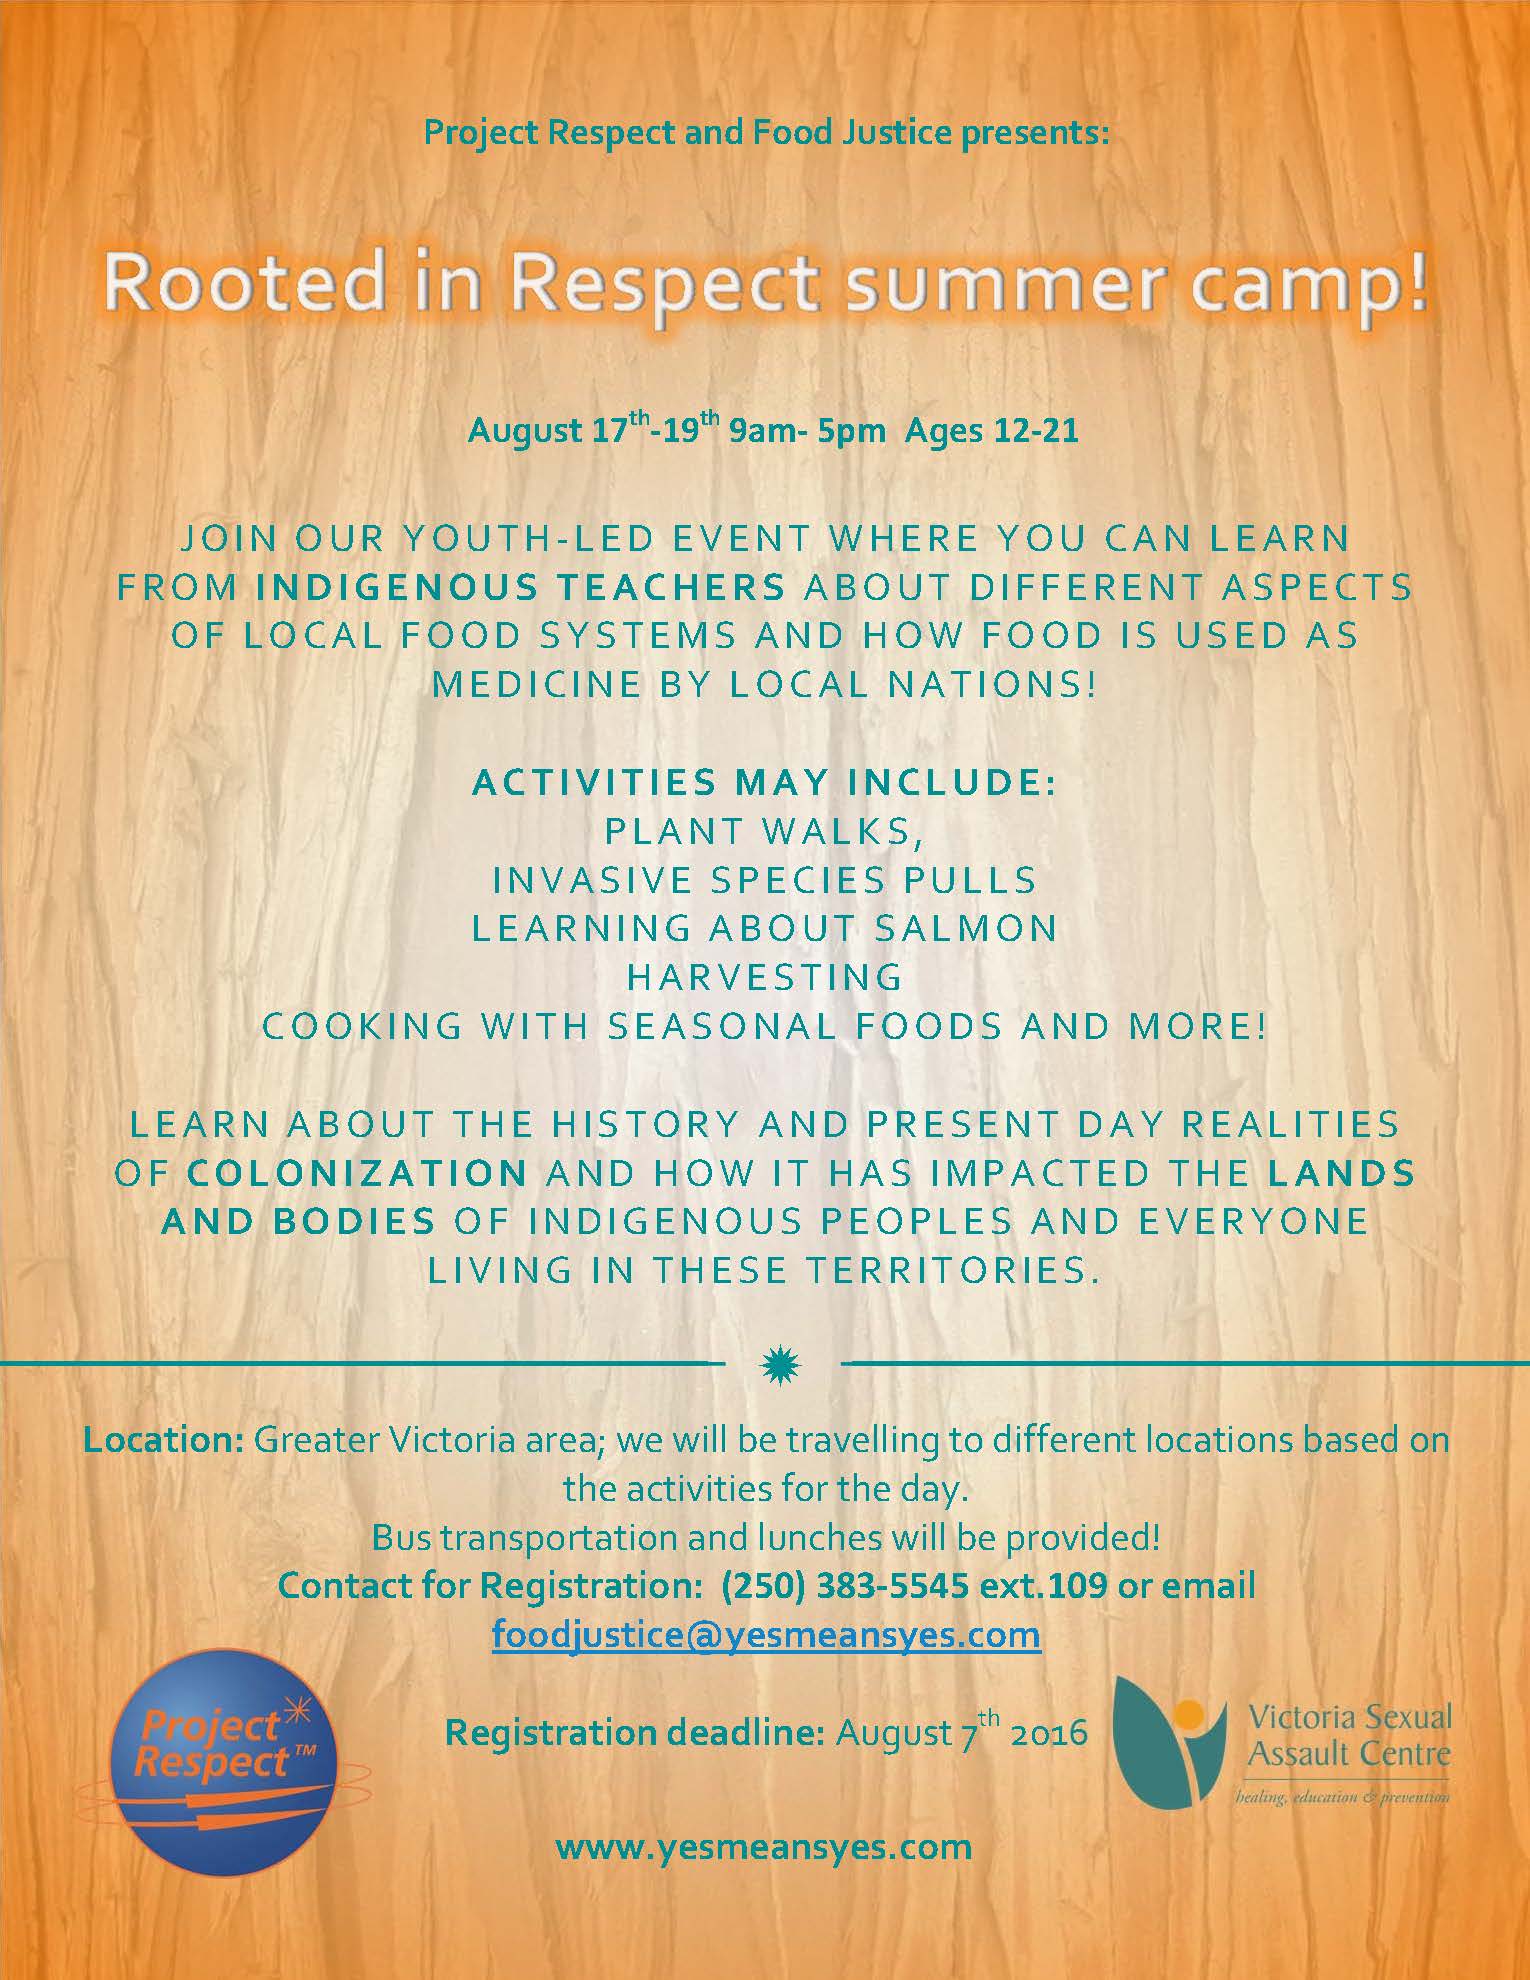 Poster on a wood background advertising Rooted in Respect summer camp from August 2016